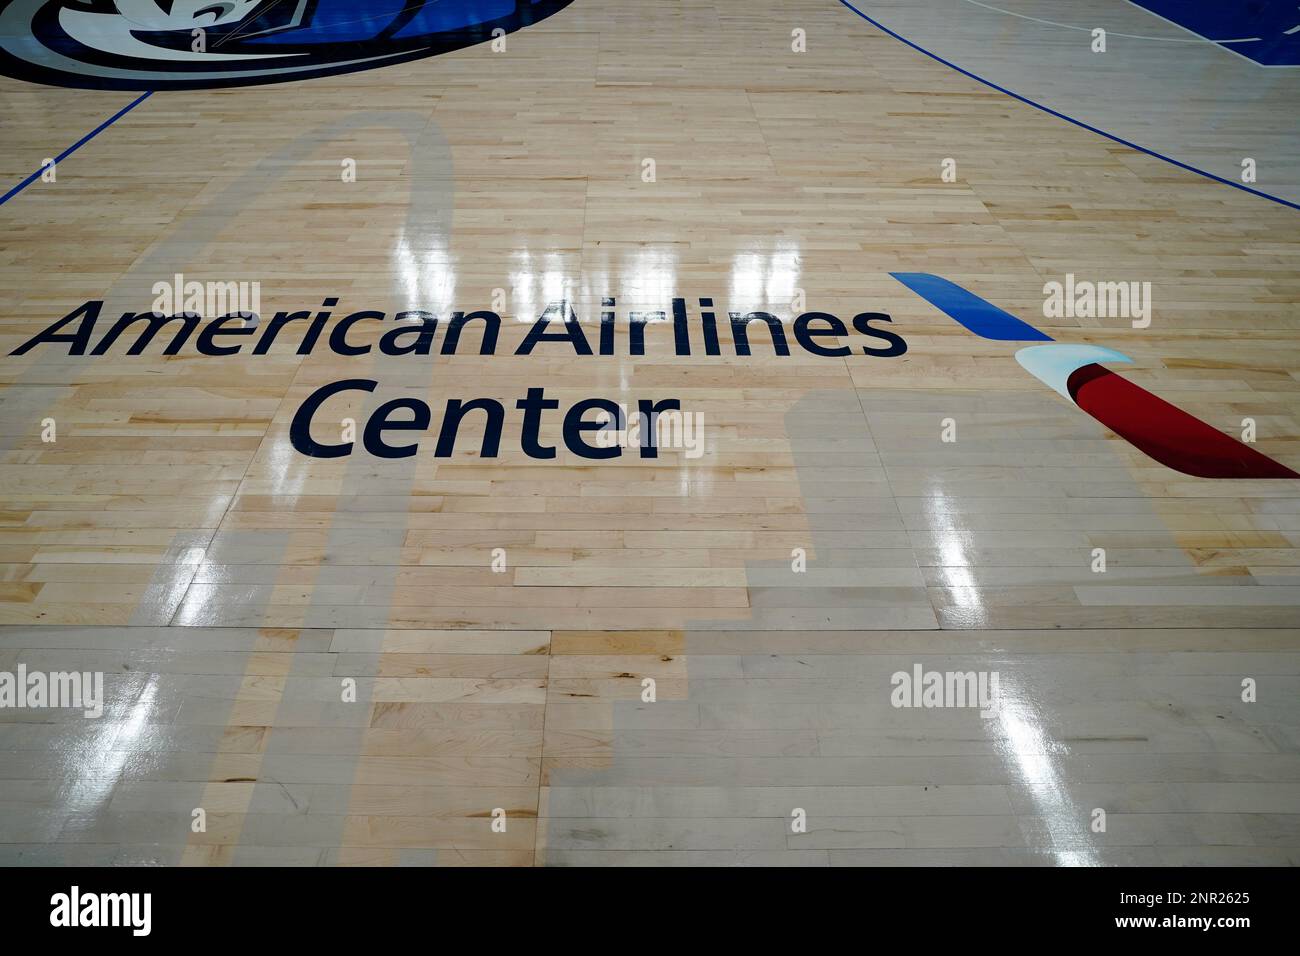 In a courtside view the Dallas skyline is seen painted on the court below  the American Airlines Center name before an NBA basketball game between the  Memphis Grizzlies and the Dallas Mavericks